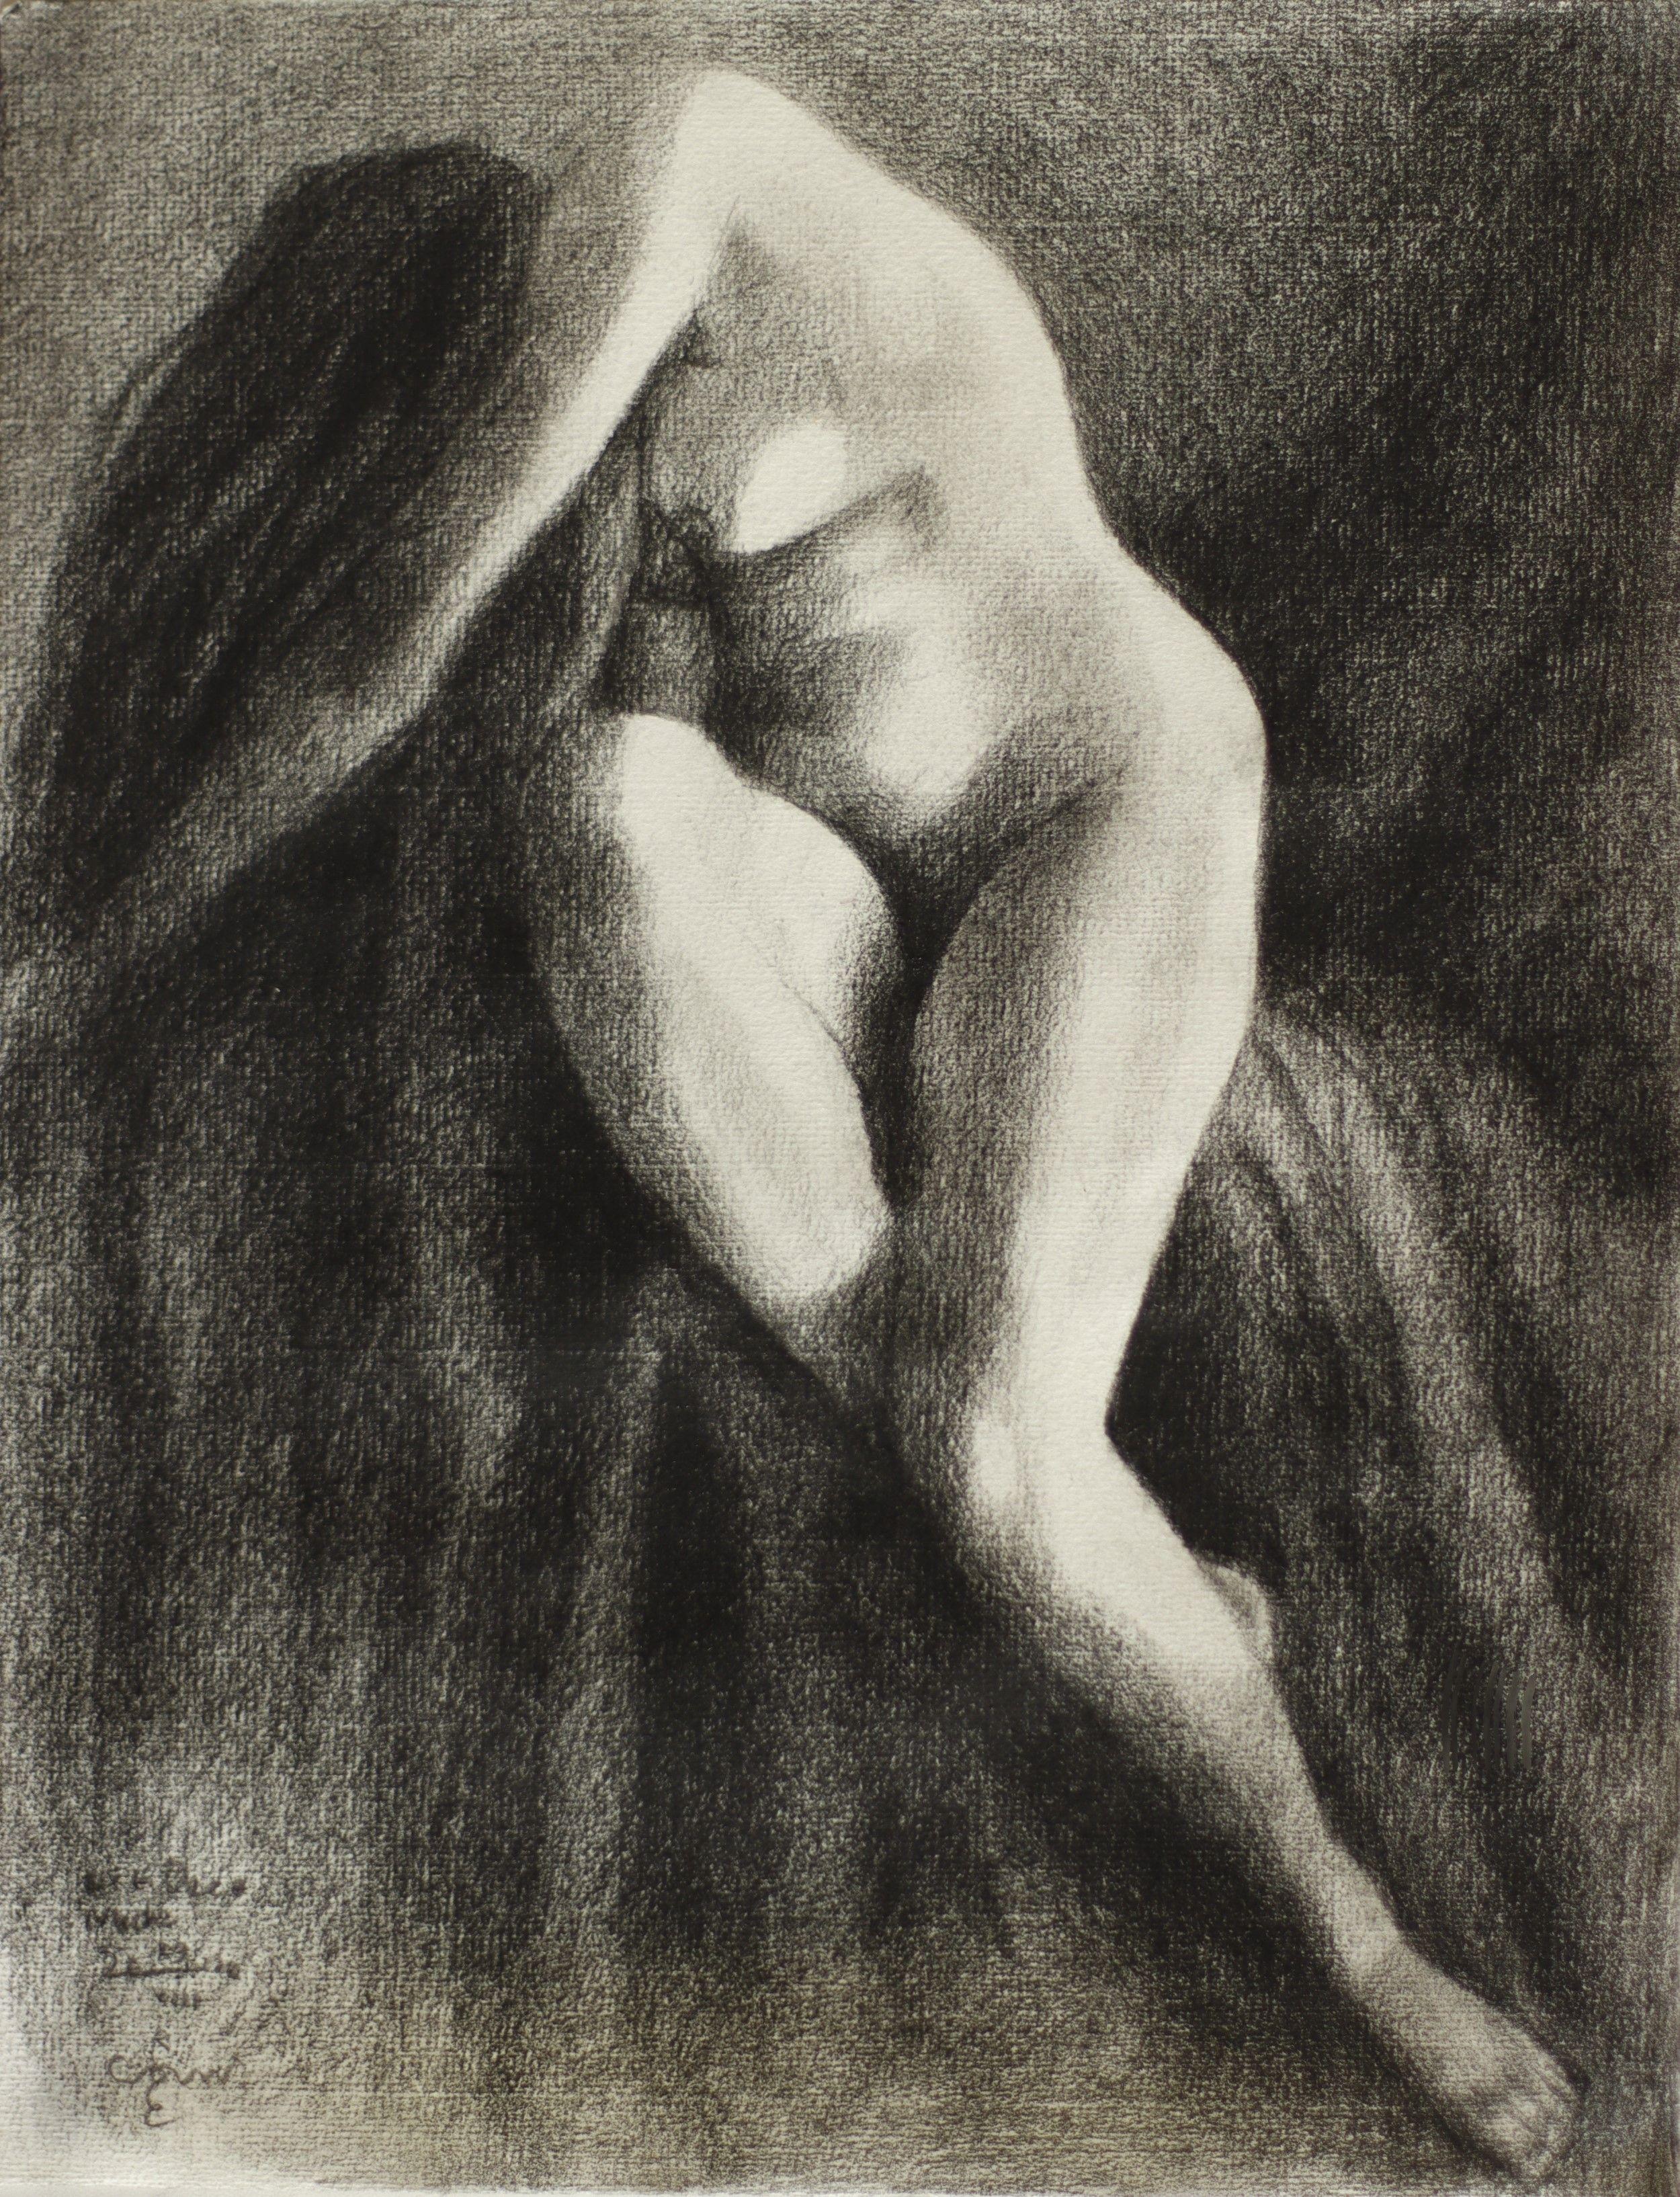 Rather Curvy    Graphite Pencil drawing â€˜Art Deco Nude  29-08-22â€™ is the next one in line after â€˜Sienna â€“ 25-08-22â€™. The model for that one was great but also a bit slender. The bended knee almost seemed a bit off, even though I already